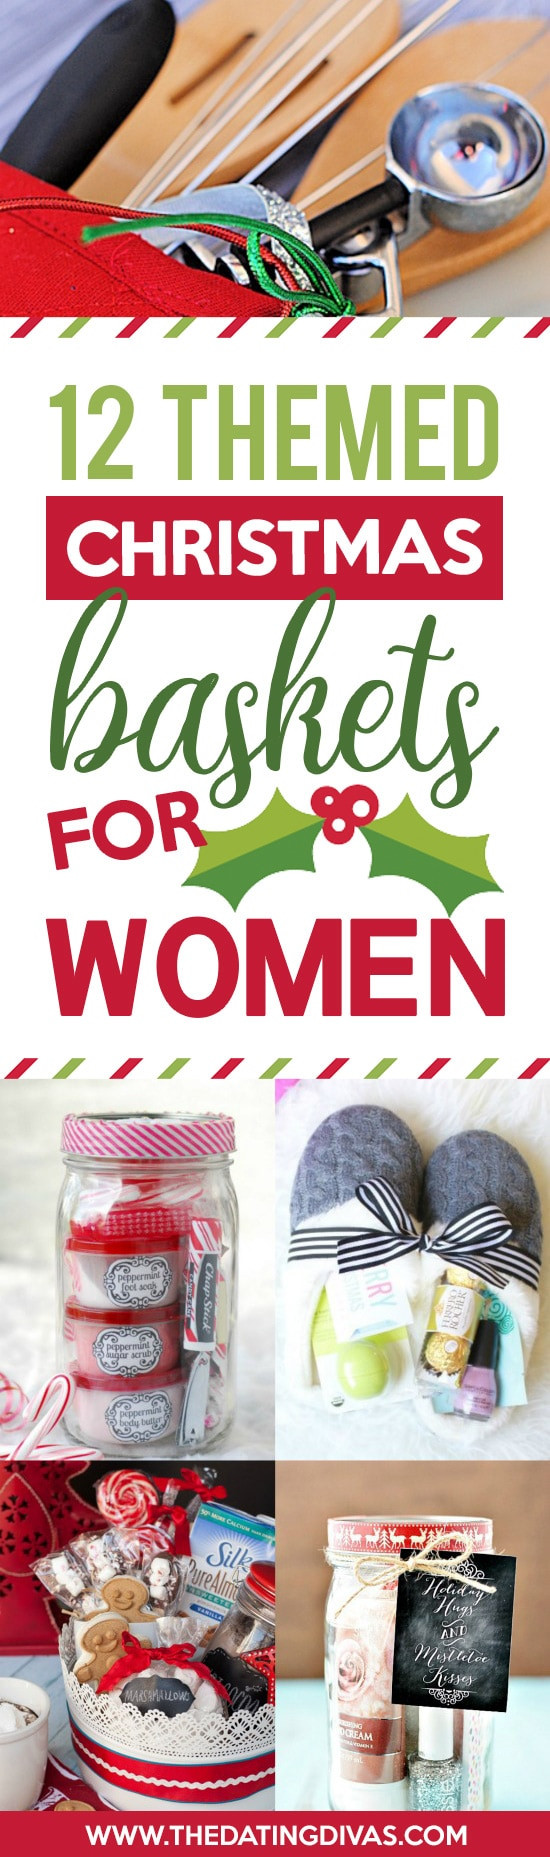 DIY Christmas Gifts For Women
 50 Themed Christmas Basket Ideas The Dating Divas